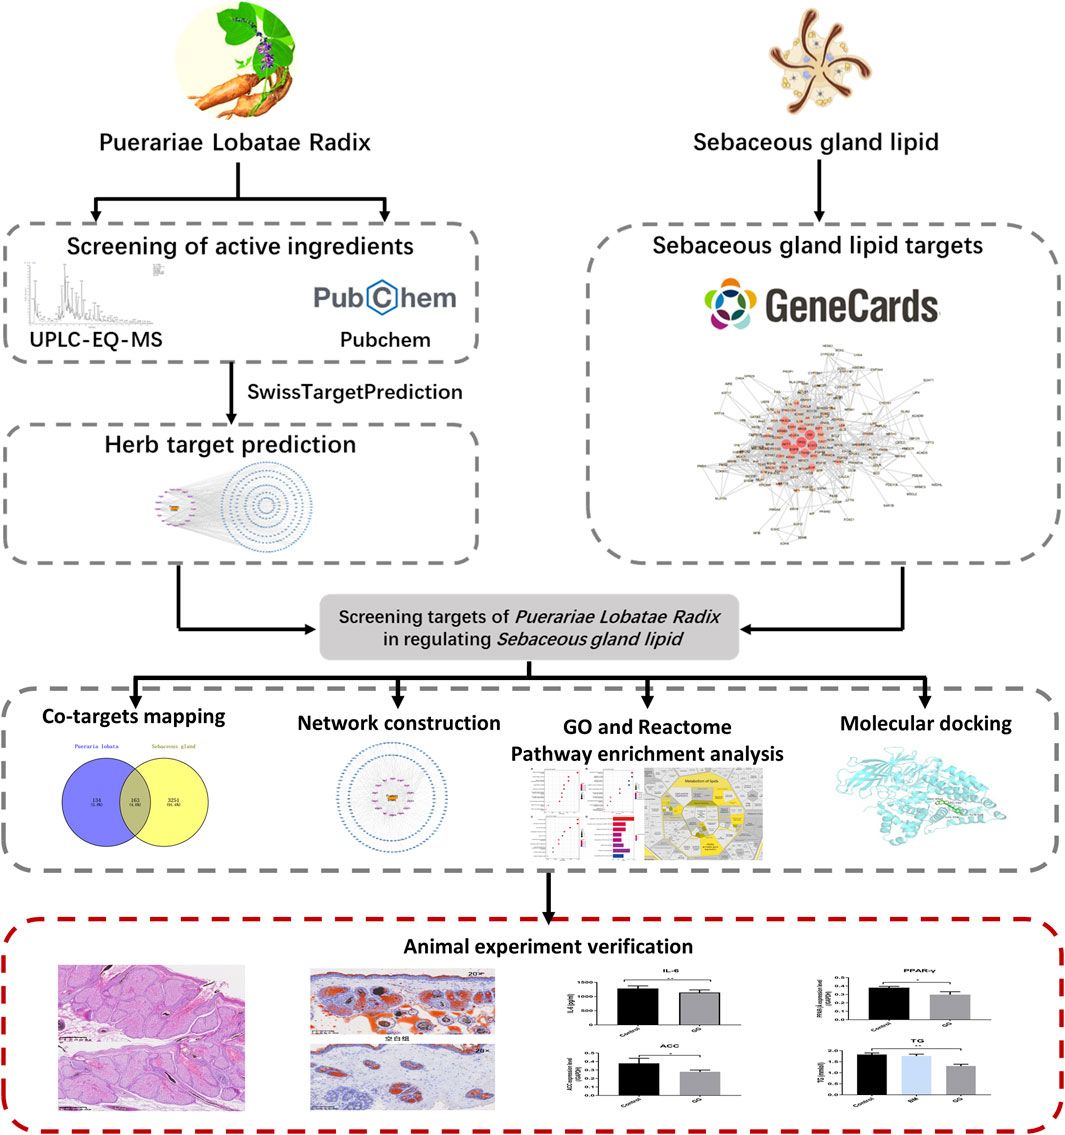 Mechanisms of Puerariae Lobatae Radix in regulating sebaceous gland secretion: insights from network pharmacology and experimental validation